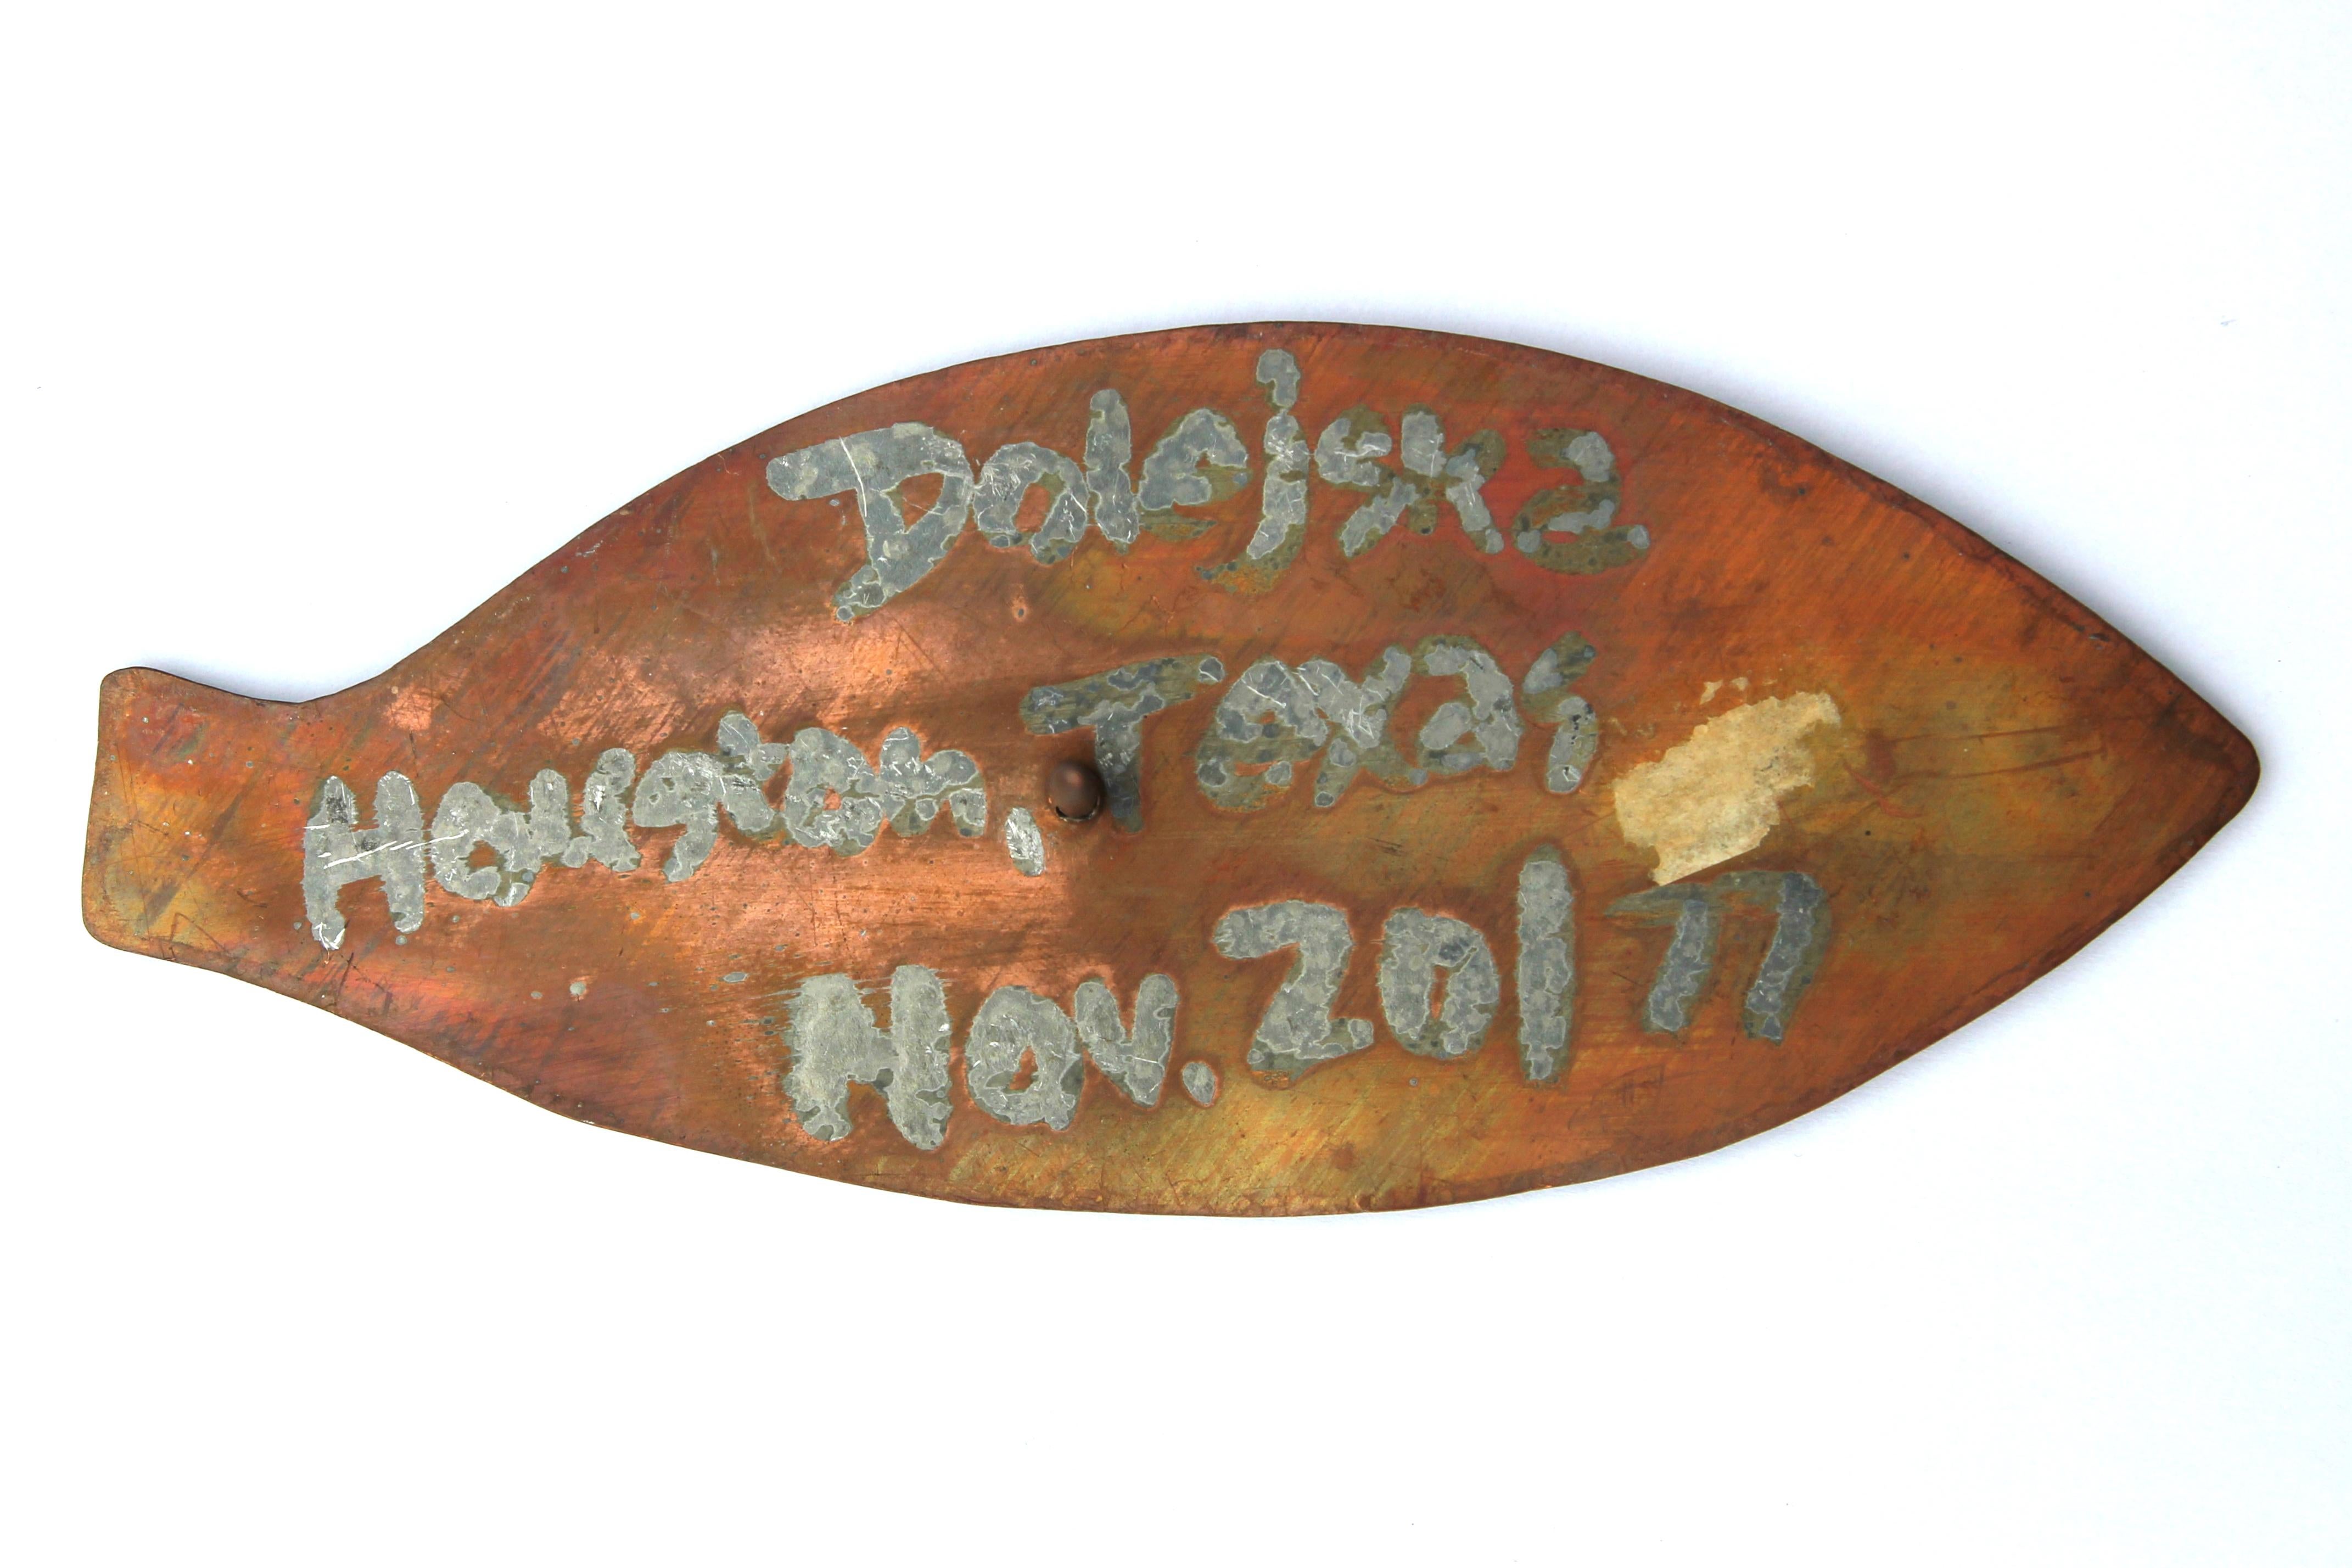 Modern abstract fish sculpture made of copper by Houston, TX artist Frank Dolejska. The work features a rounded fish shape with the words 